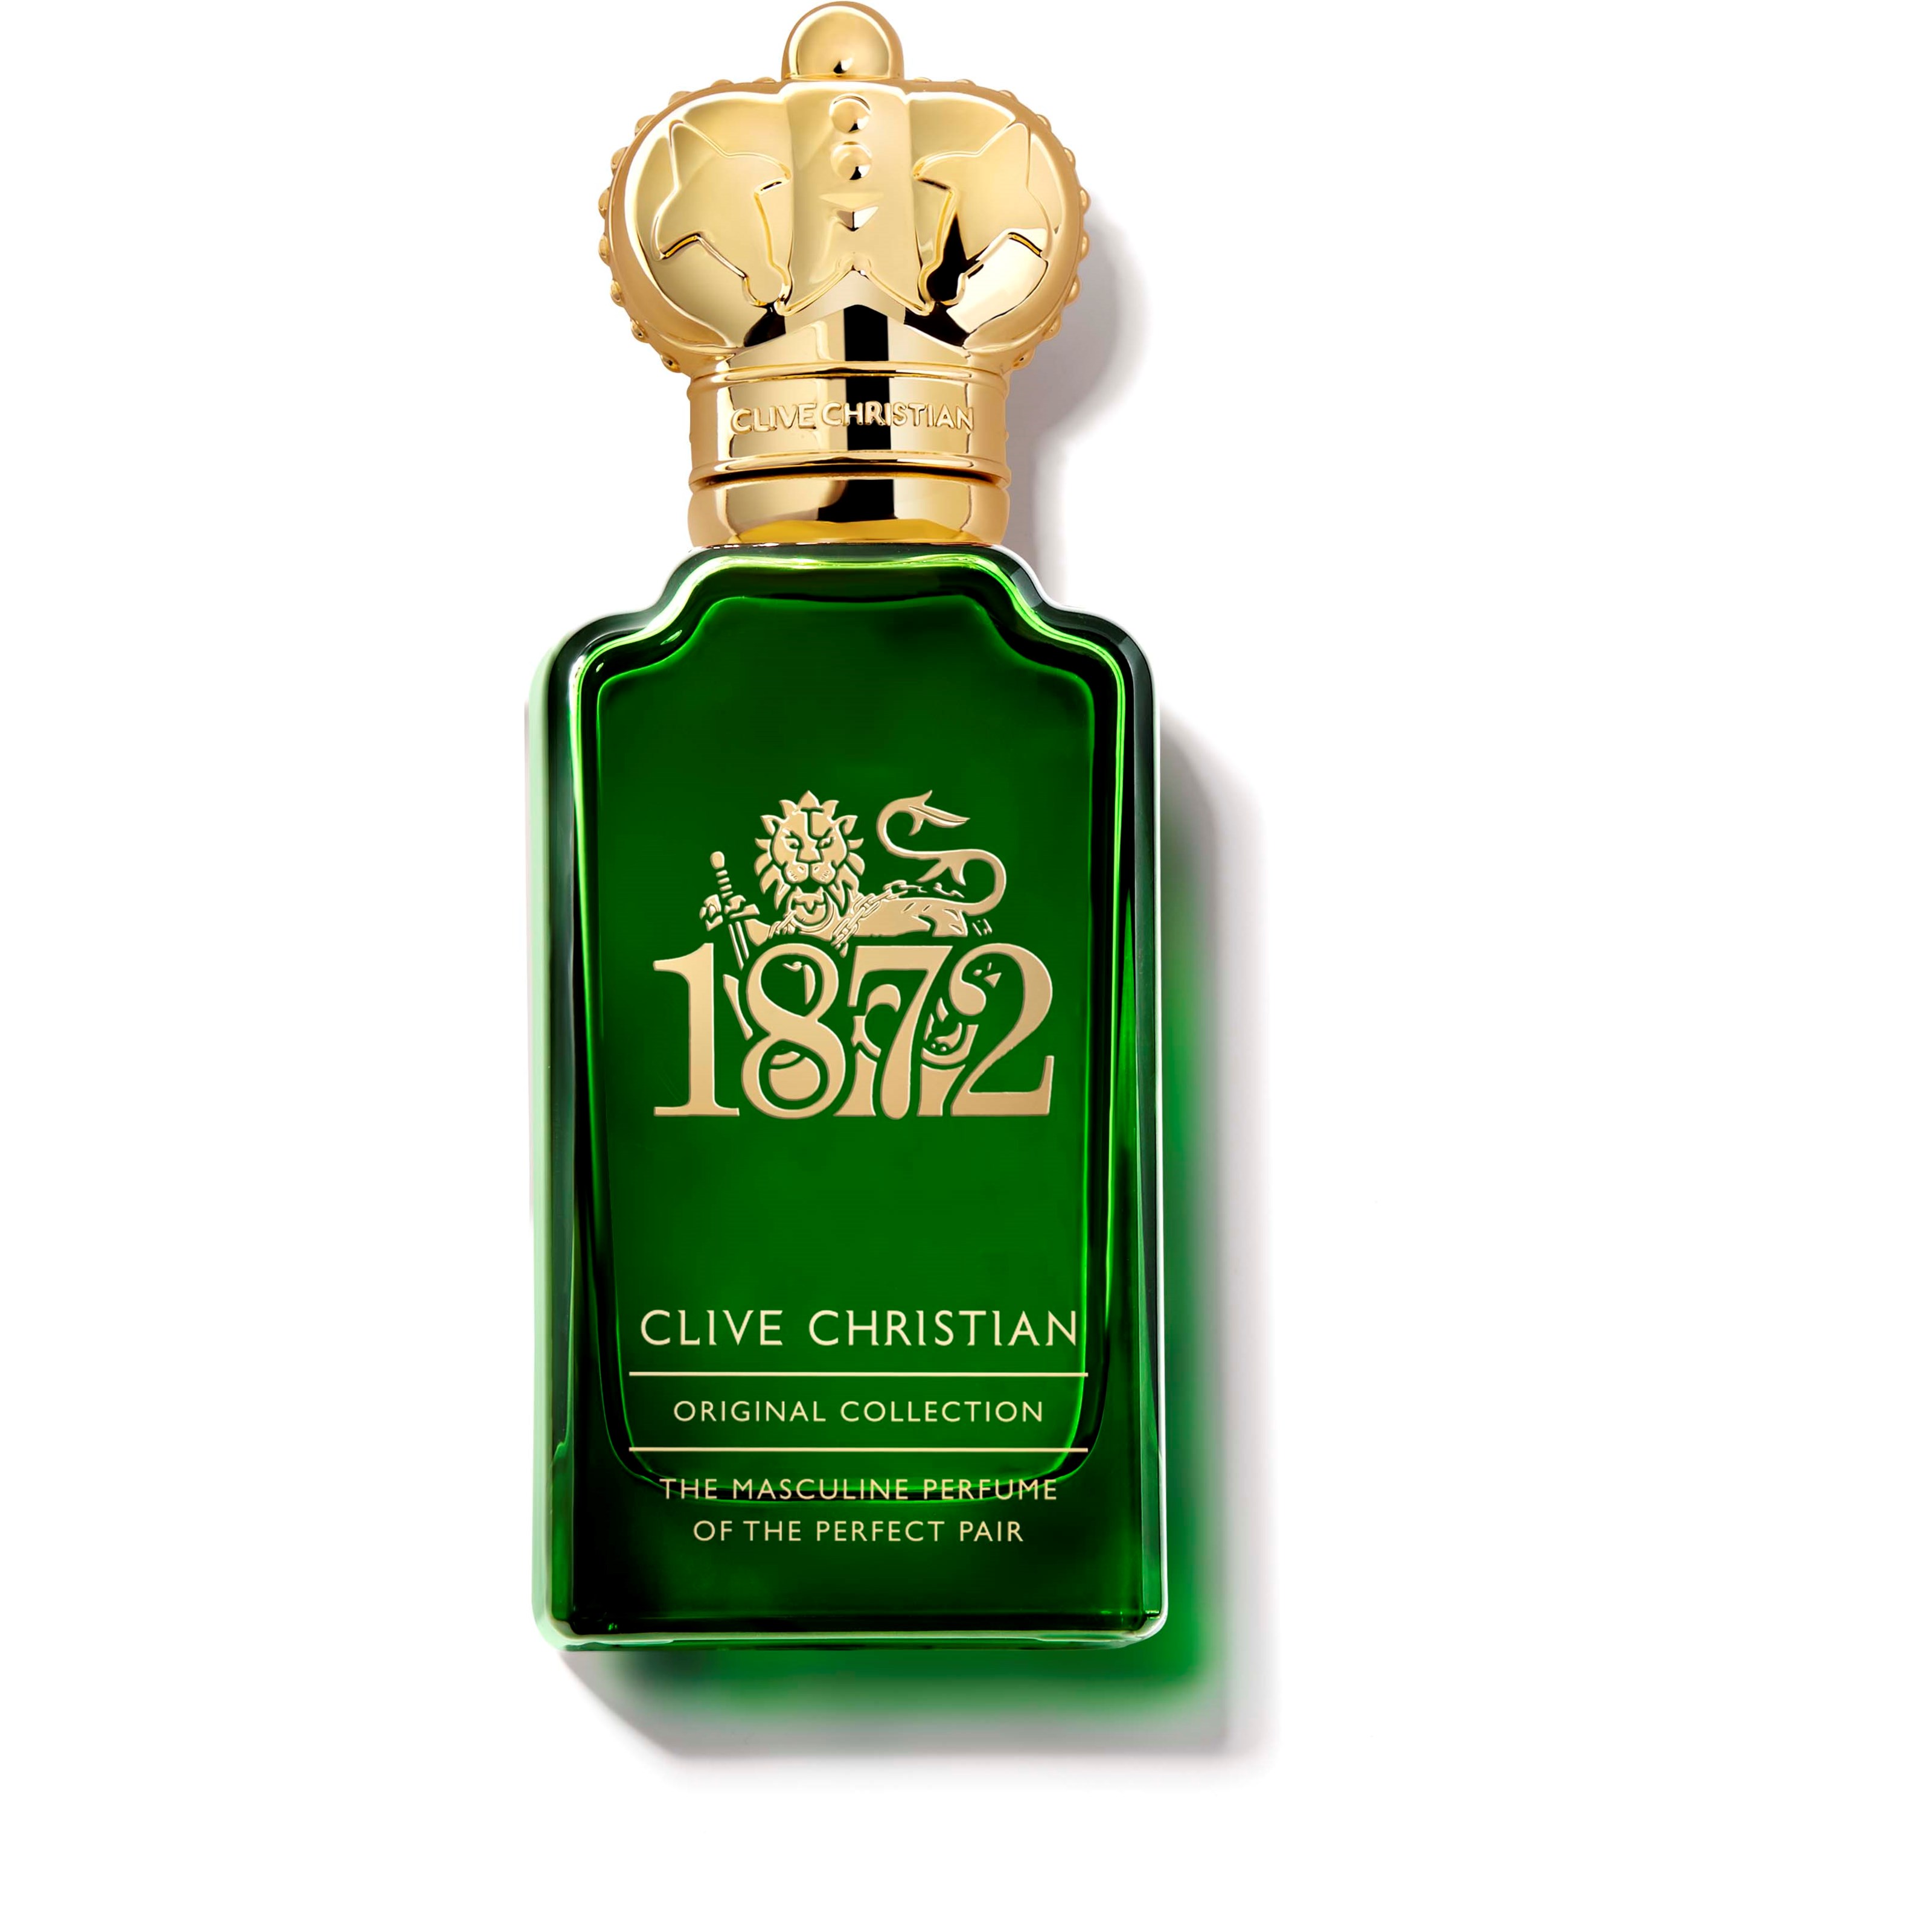 Clive Christian Original Collection 1872 The Masculine Perfume Of